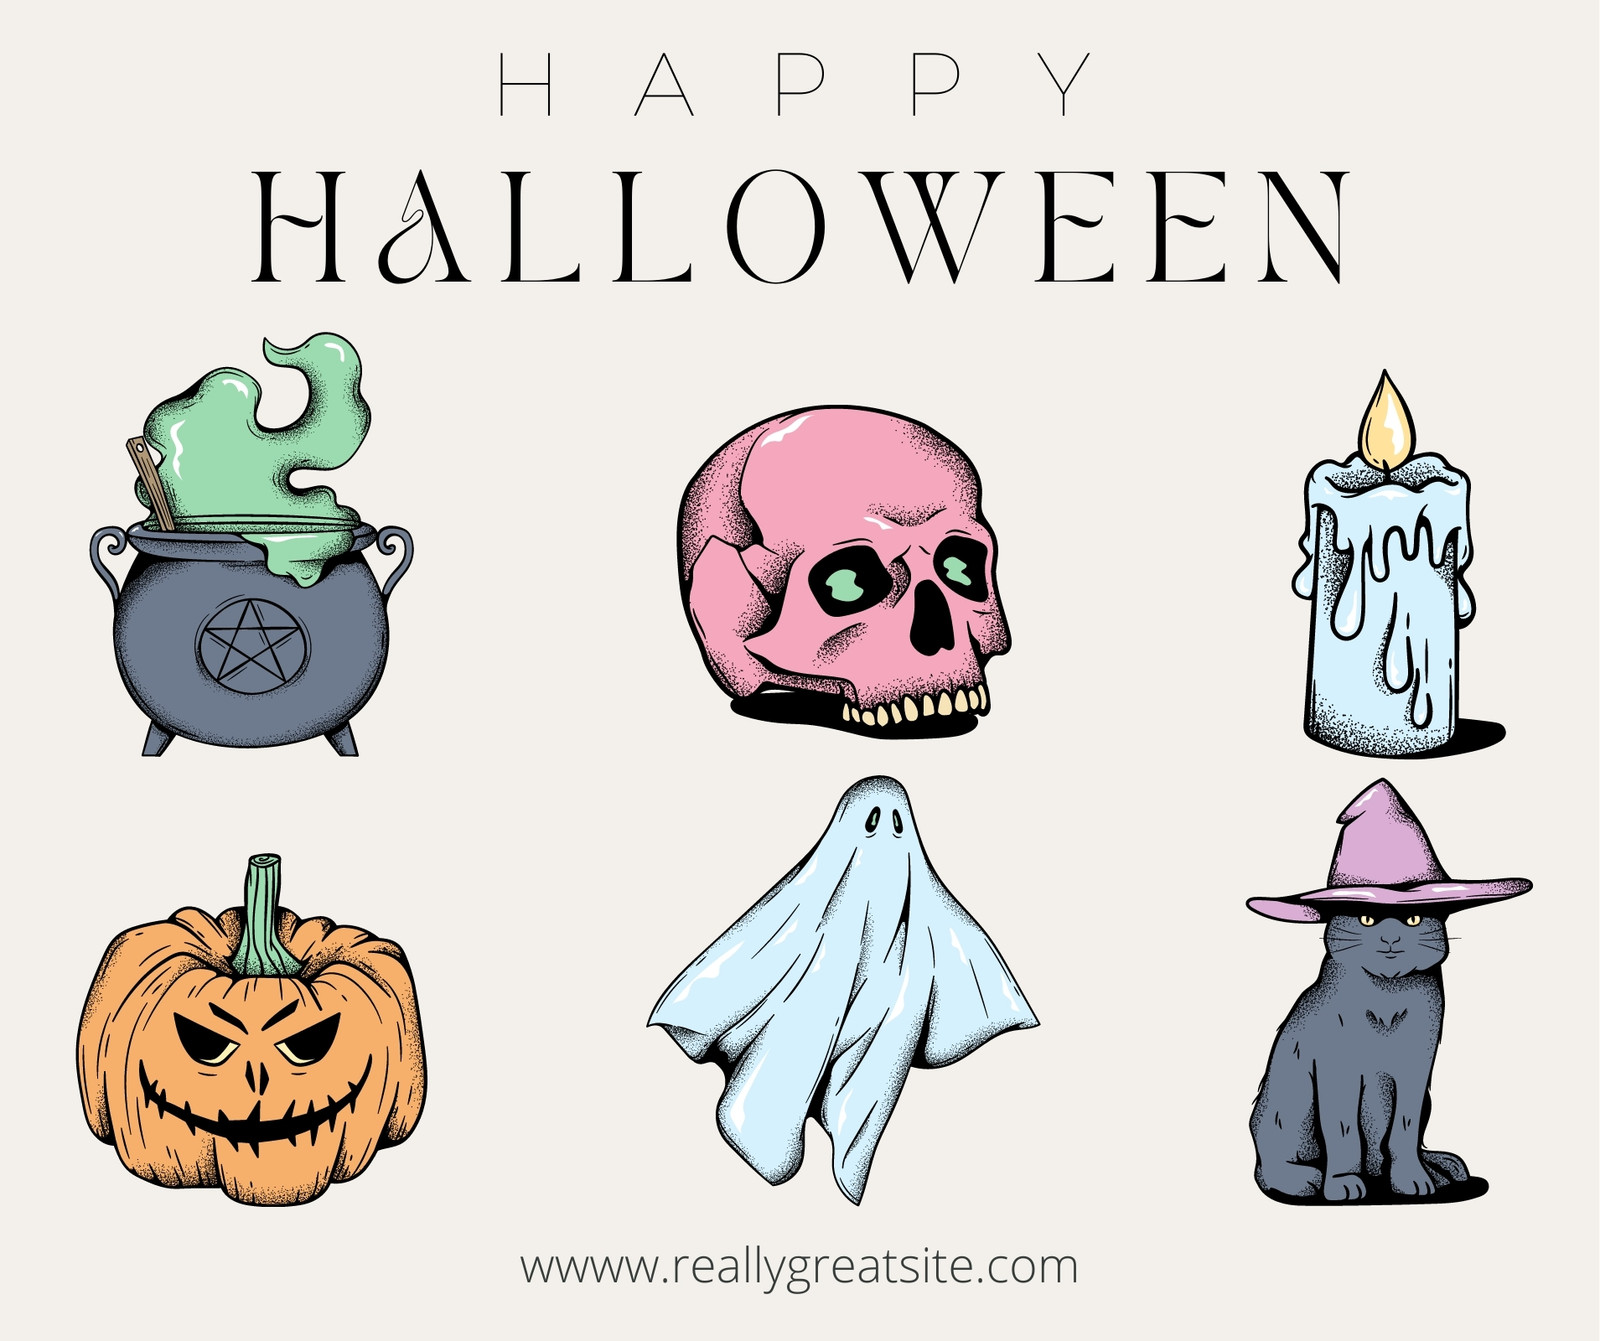 Premium Vector  Halloween vampire cartoon with pumpkin mask at night  design, holiday and scary theme illustration